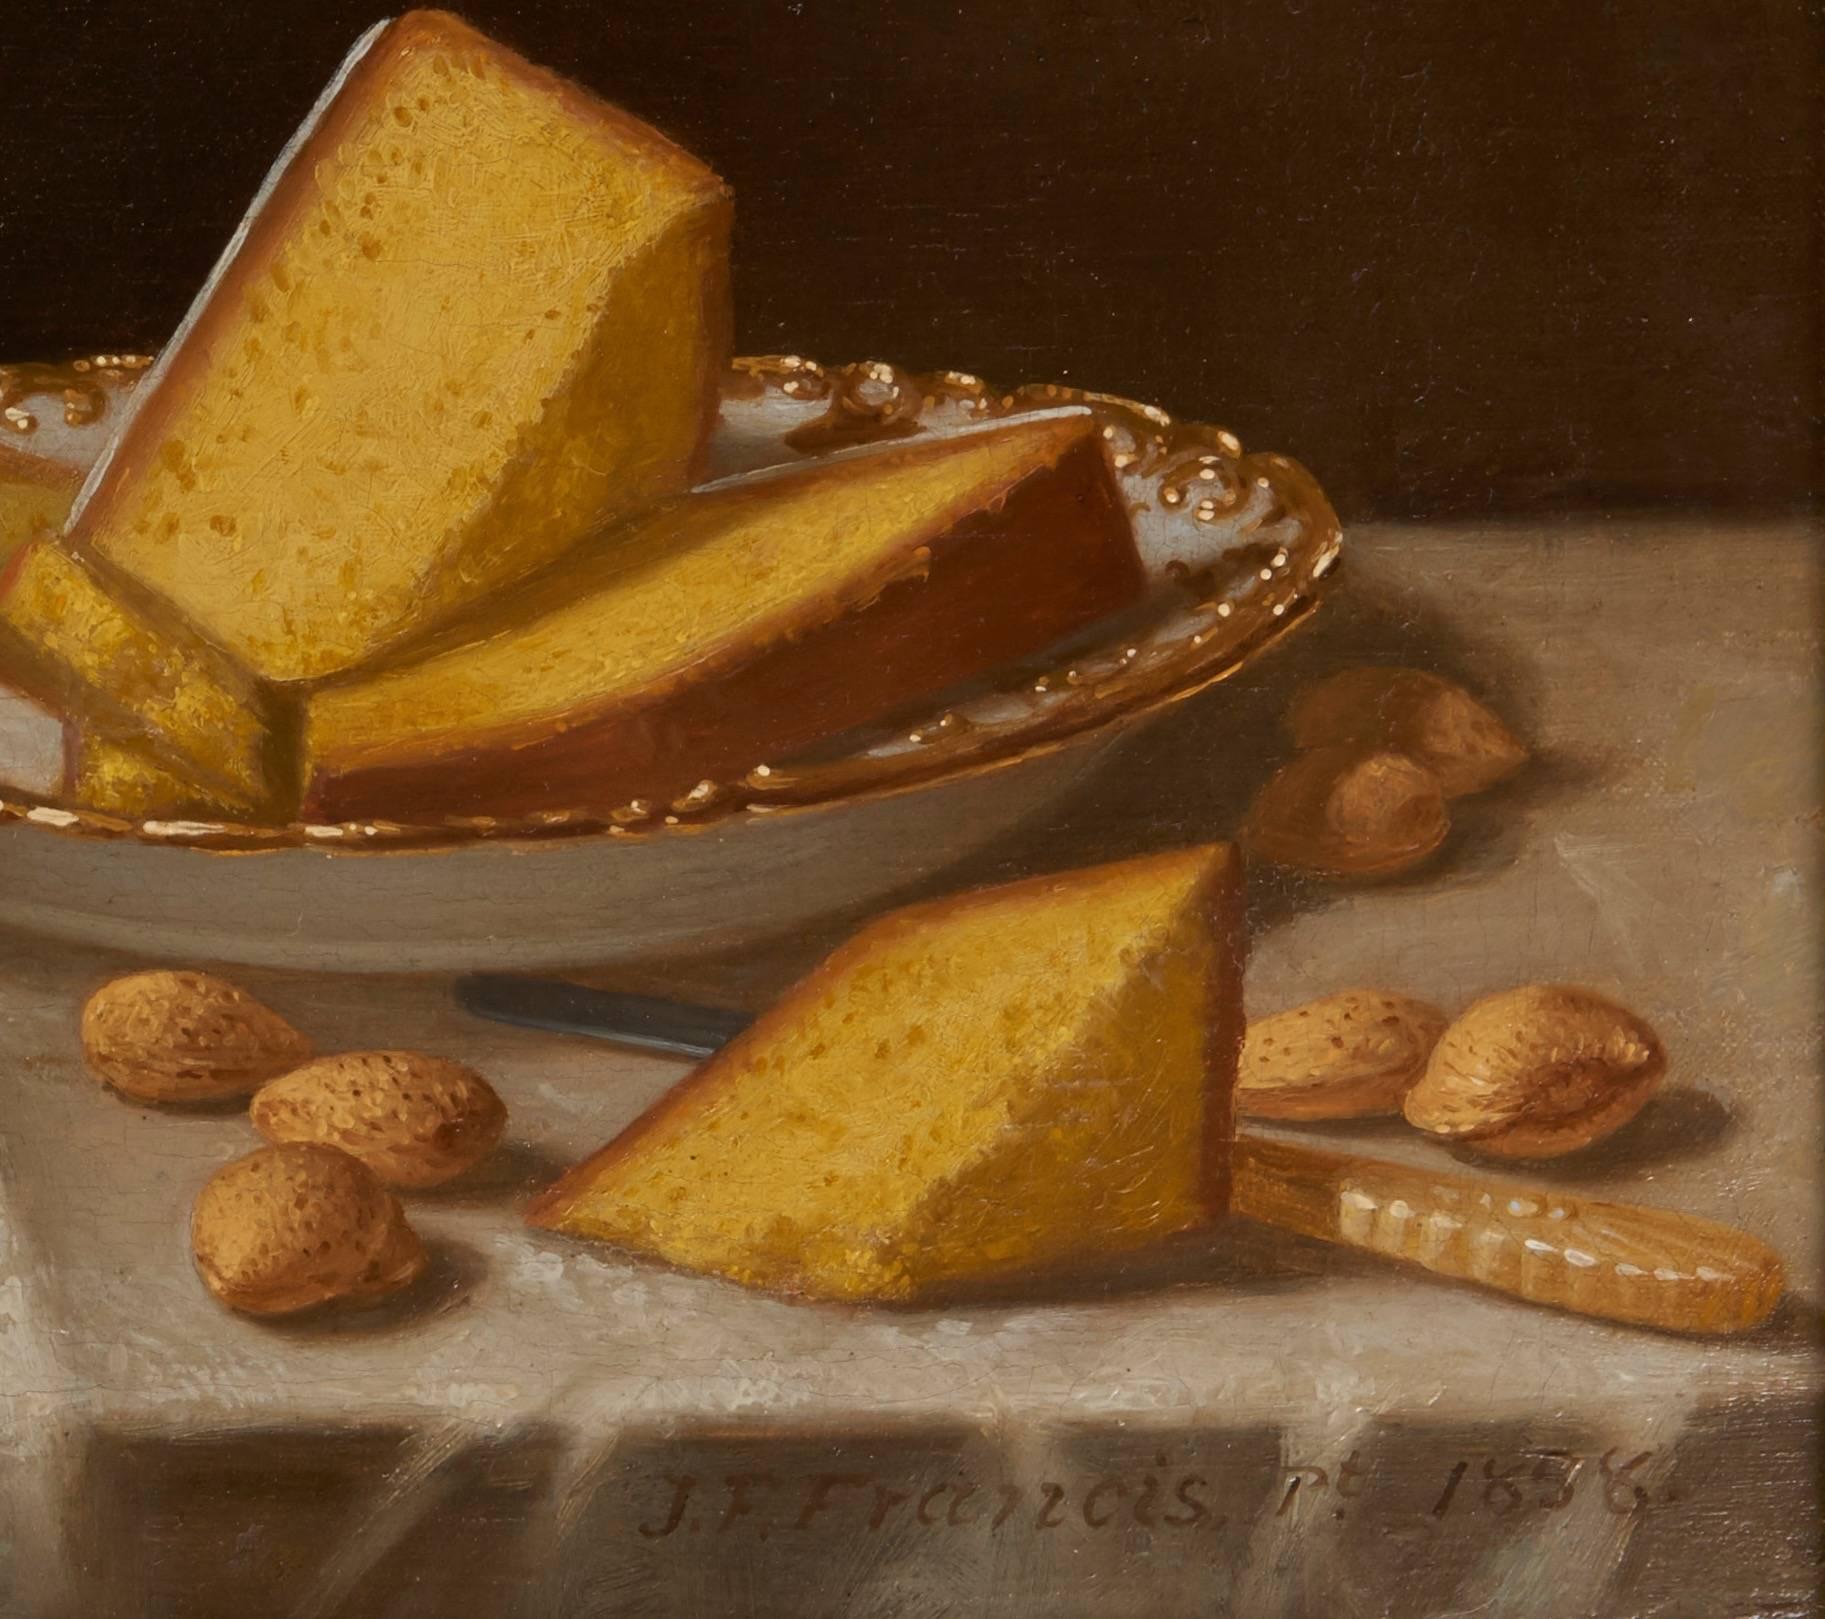 American Classical Still Life with Cake by John F. Francis